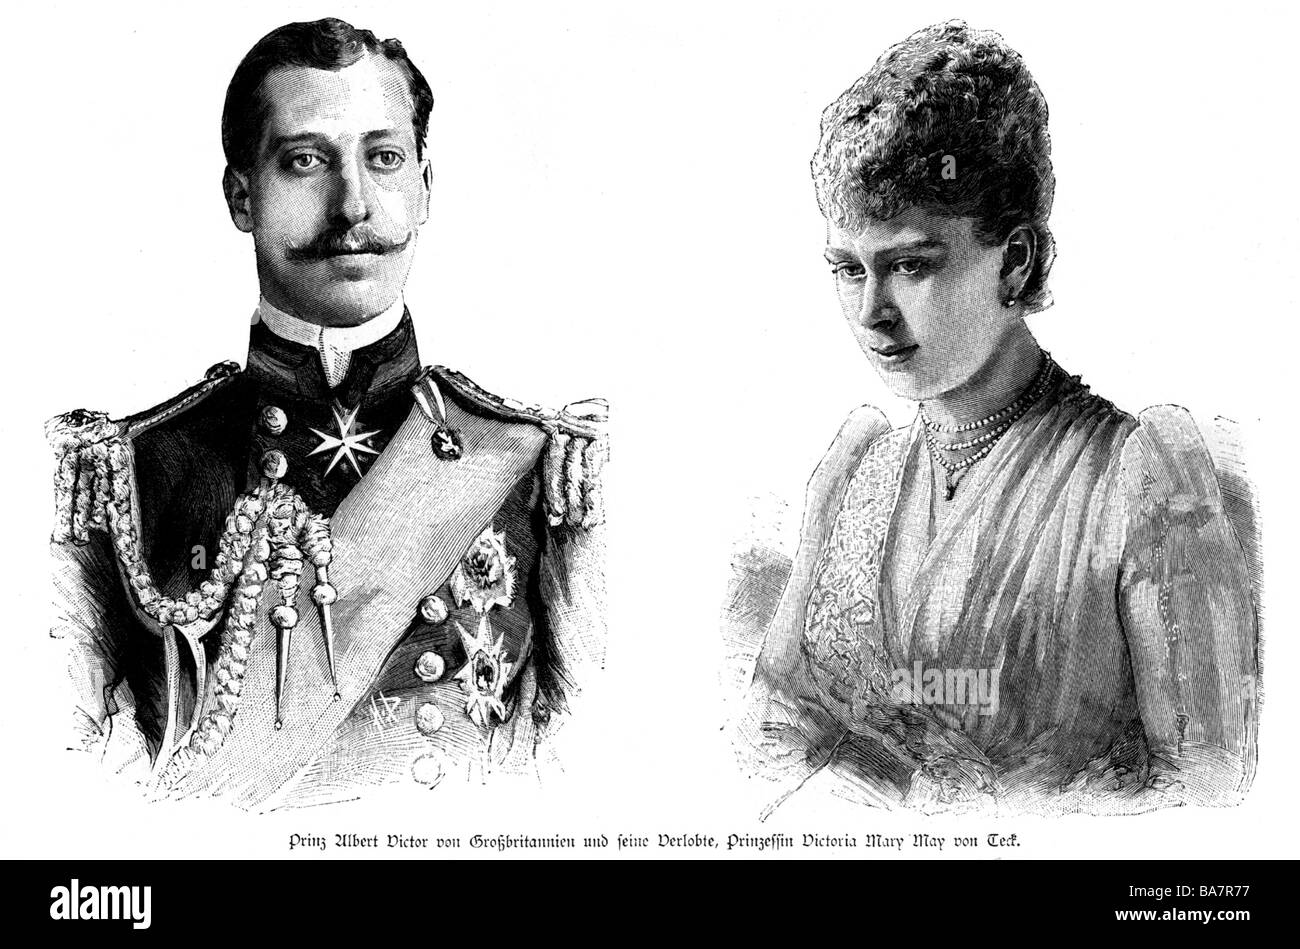 Albert Victor, 8.14.1864 - 14.2.1892, Duke of Clarence and Avondale since 1891, portrait, with fiance, wood engraving, 1891, Stock Photo